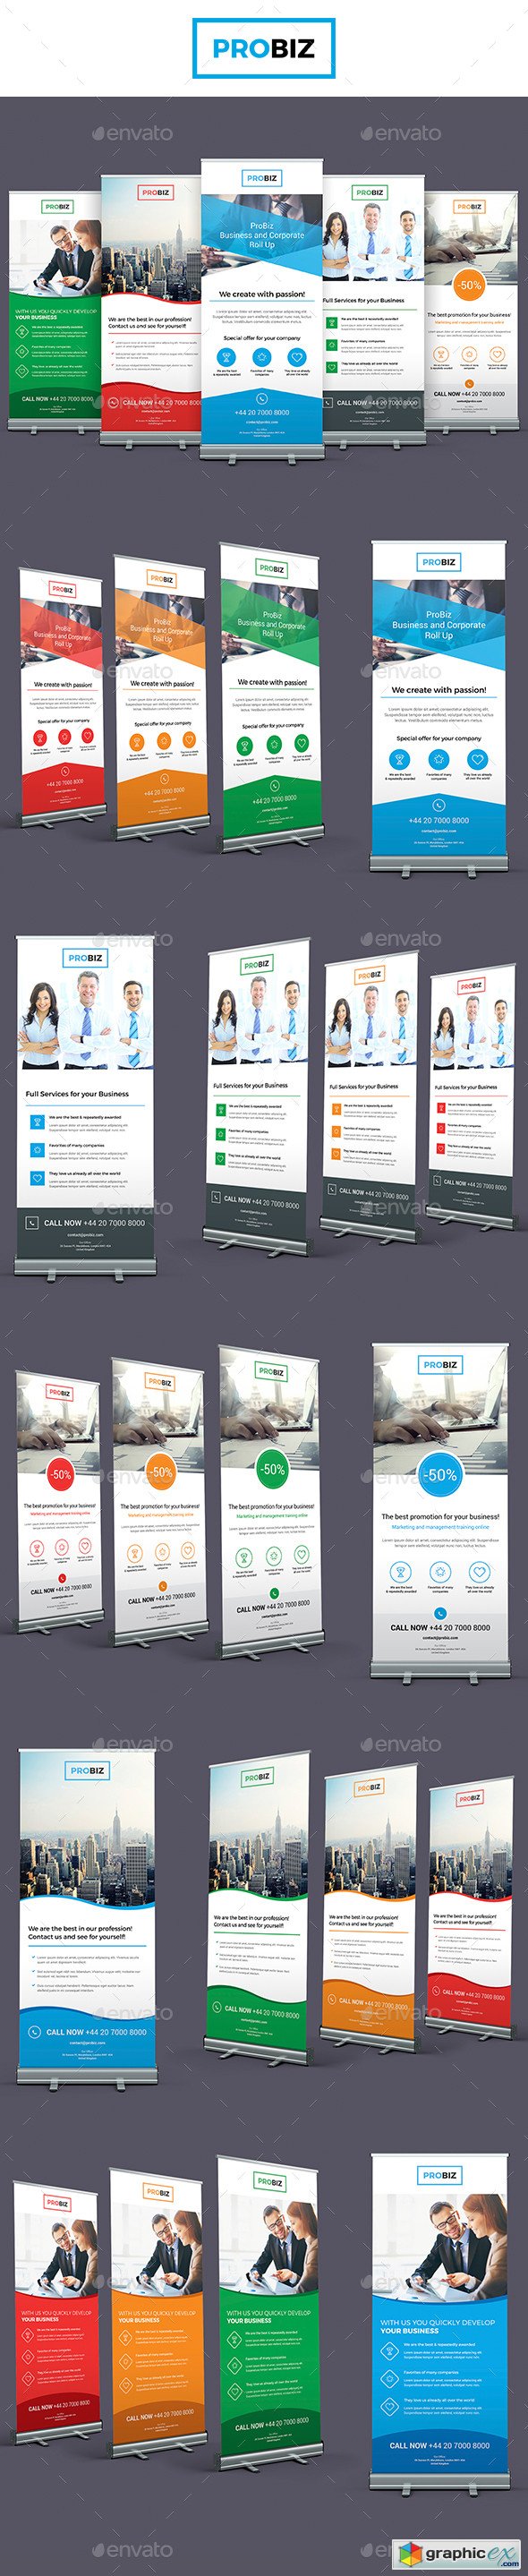 ProBiz  Business and Corporate Roll Up Banners